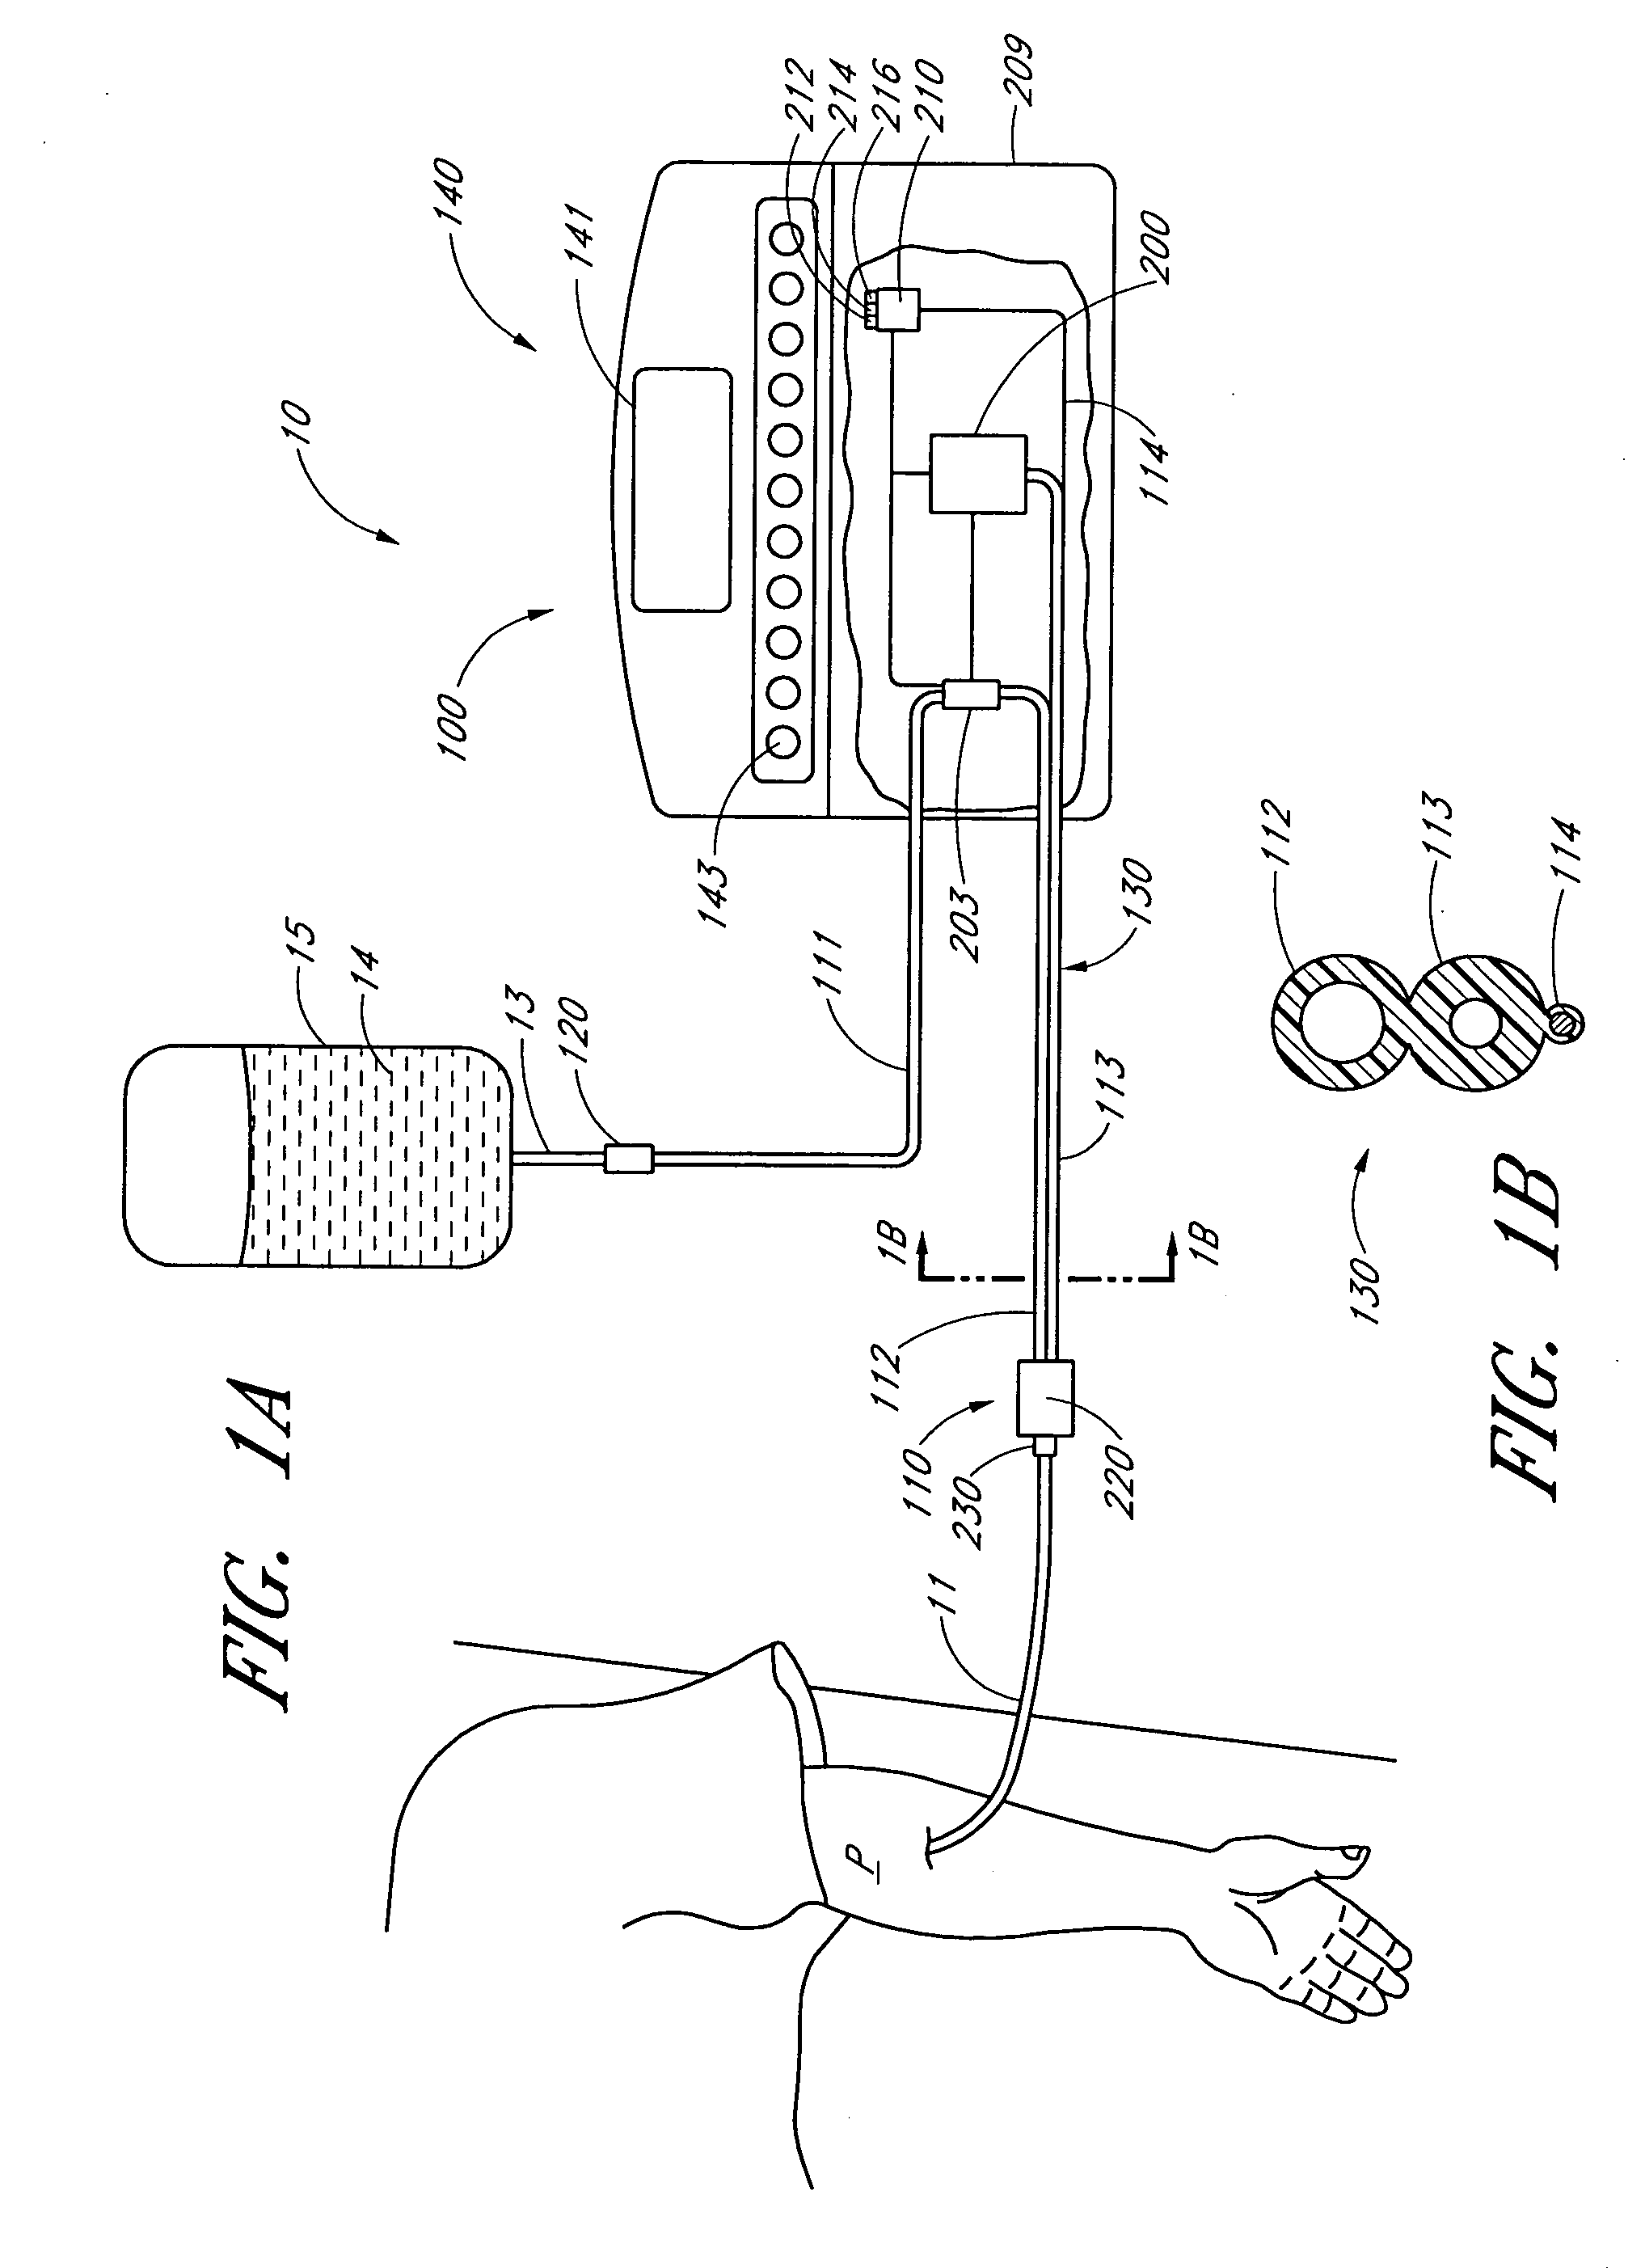 System and method for determining a treatment dose for a patient